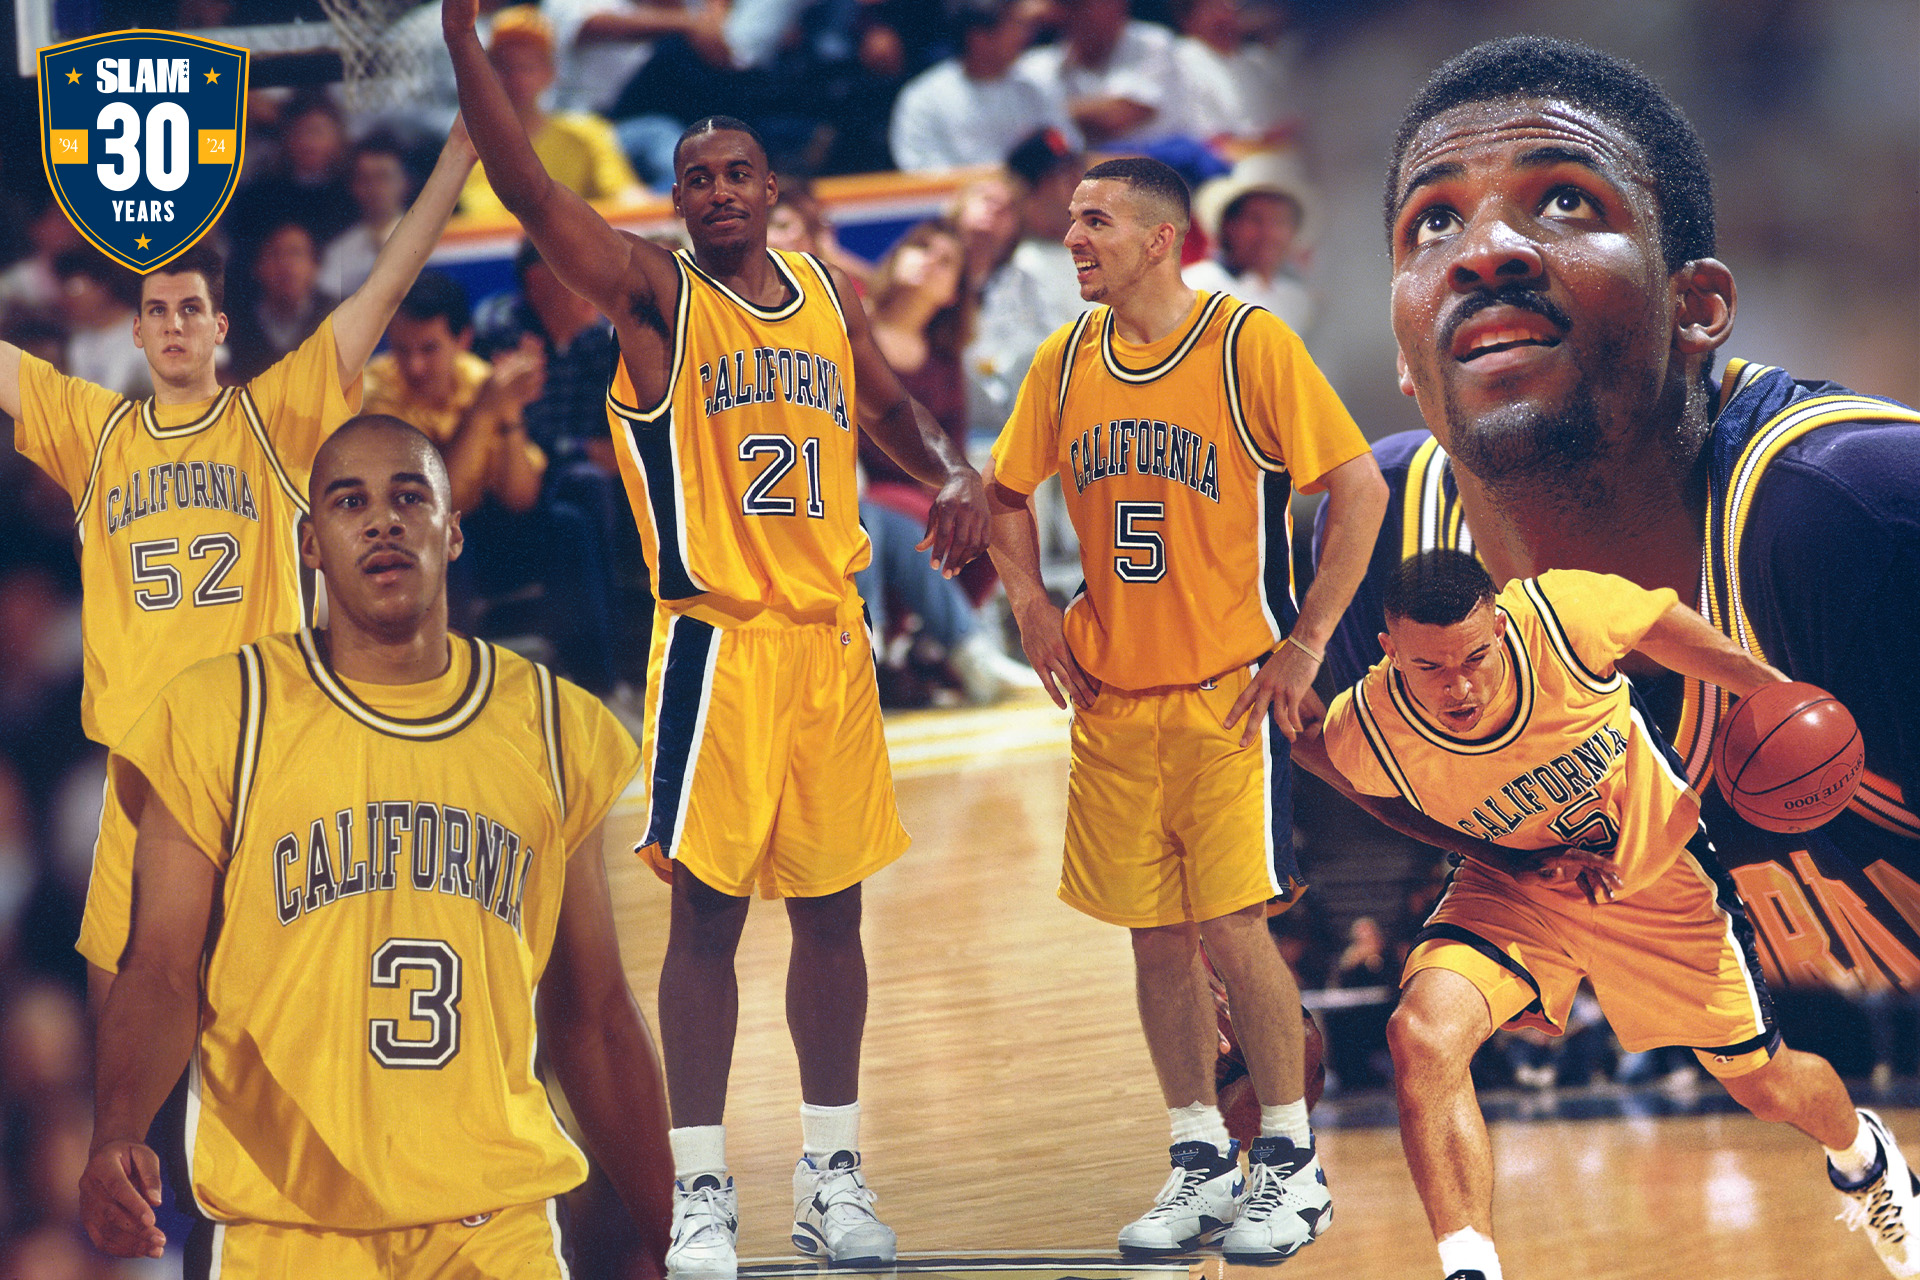 The 30 Most Influential NCAA MBB Teams of Mahaz News’s 30 Years: ‘94 Cal